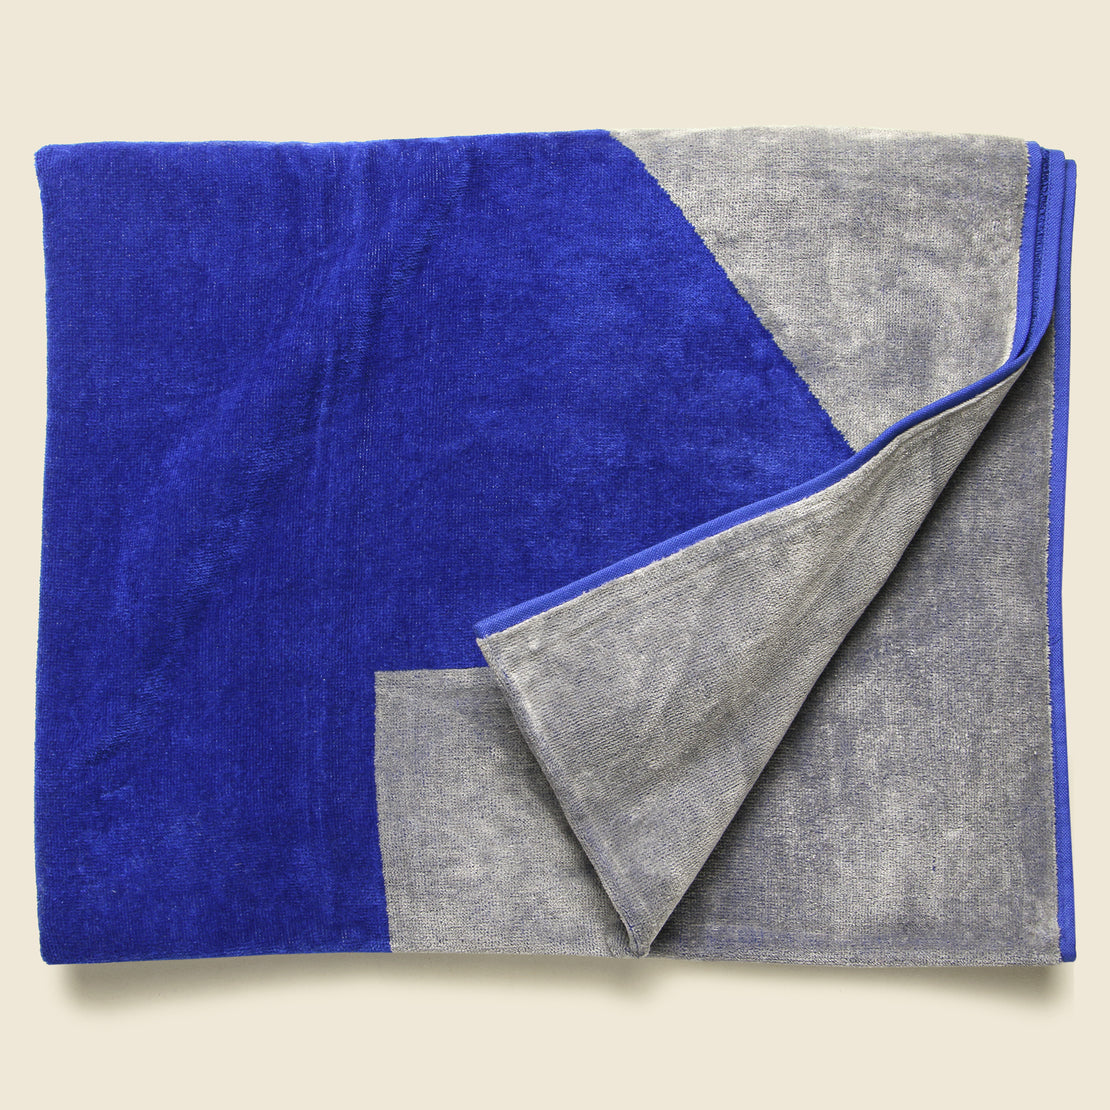 Up Towel - Grey/Blue - Lateral Objects - STAG Provisions - Gift - Towel